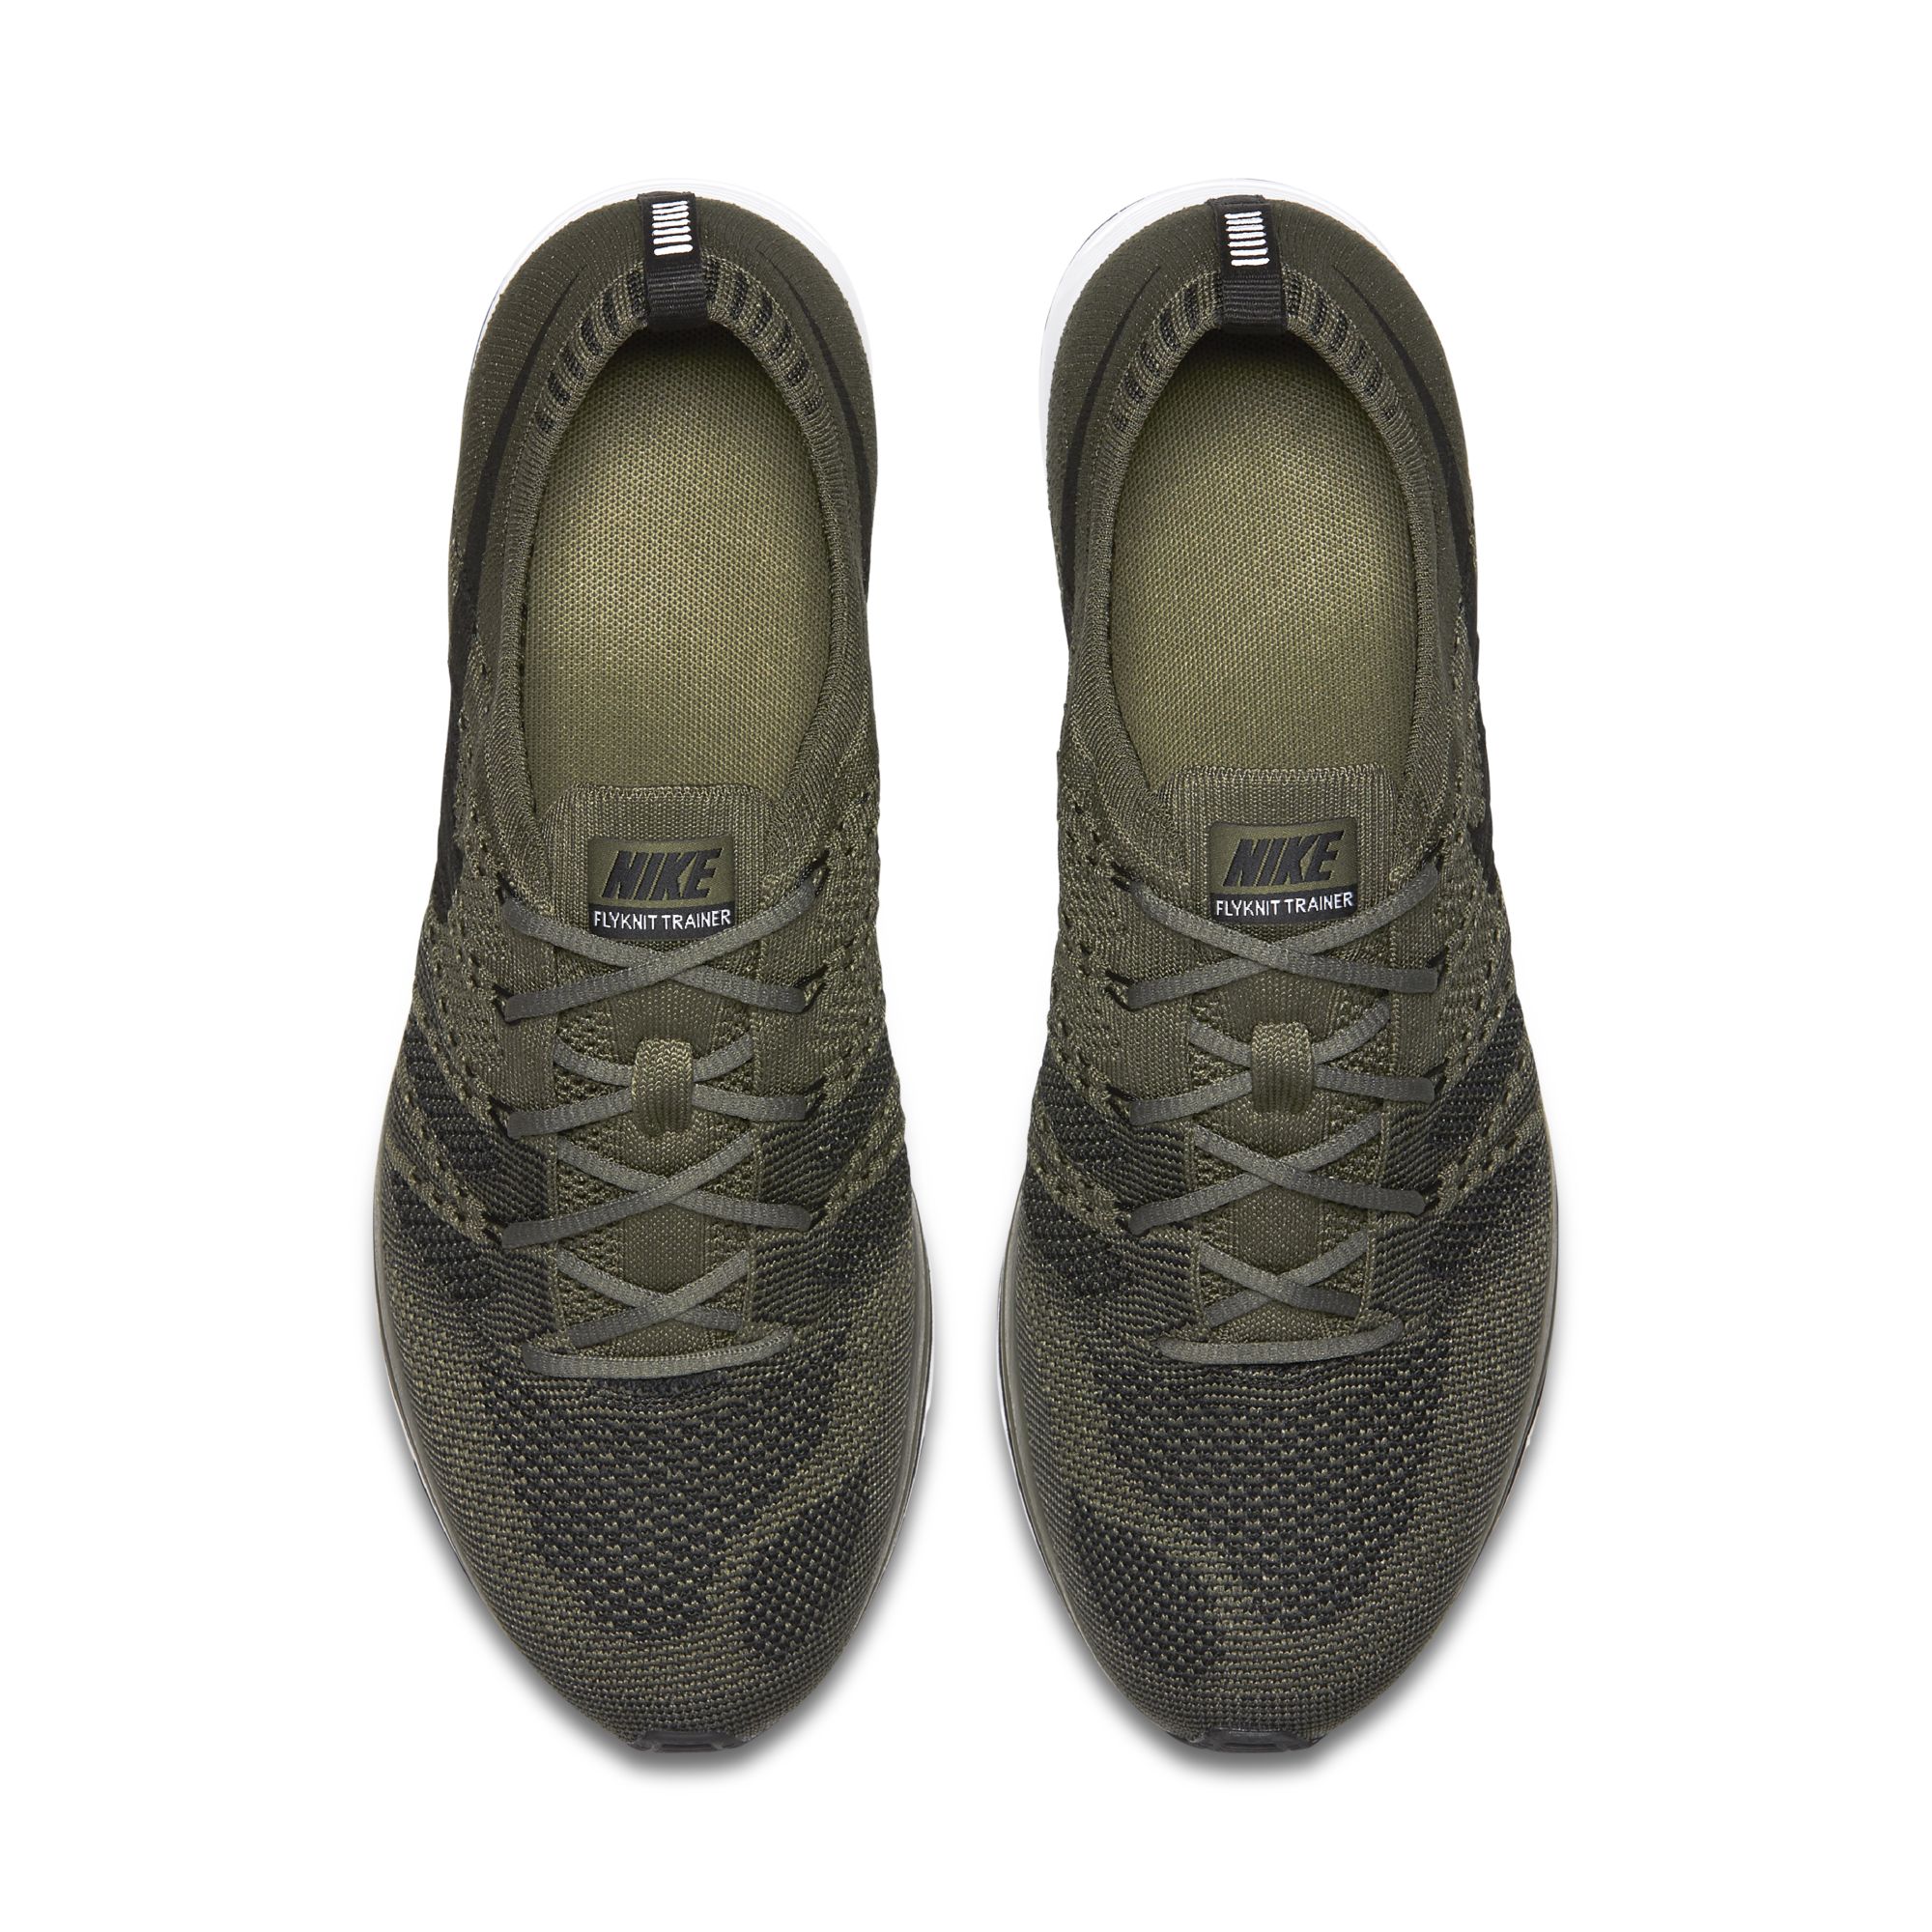 The Nike Flyknit Trainer 'Medium Olive' Drops Next Month - WearTesters